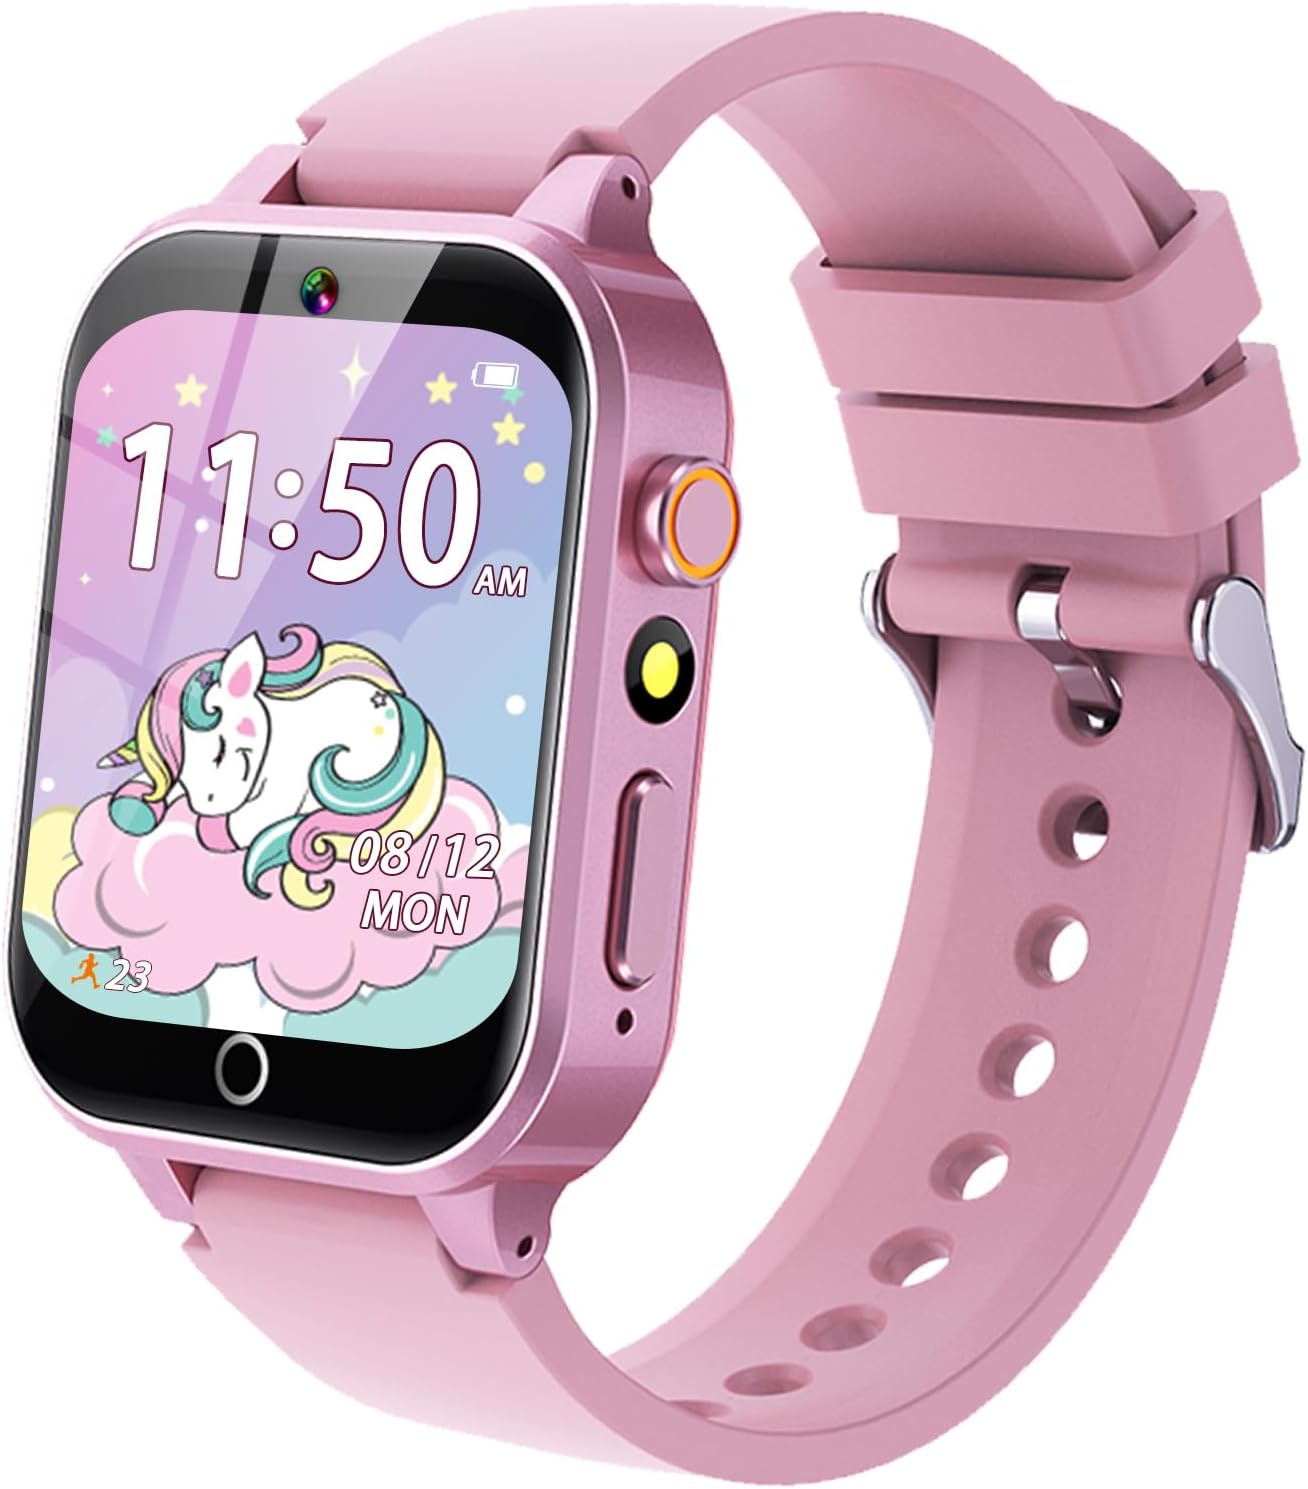 Kids Smartwatch For Girls 6-12 Review